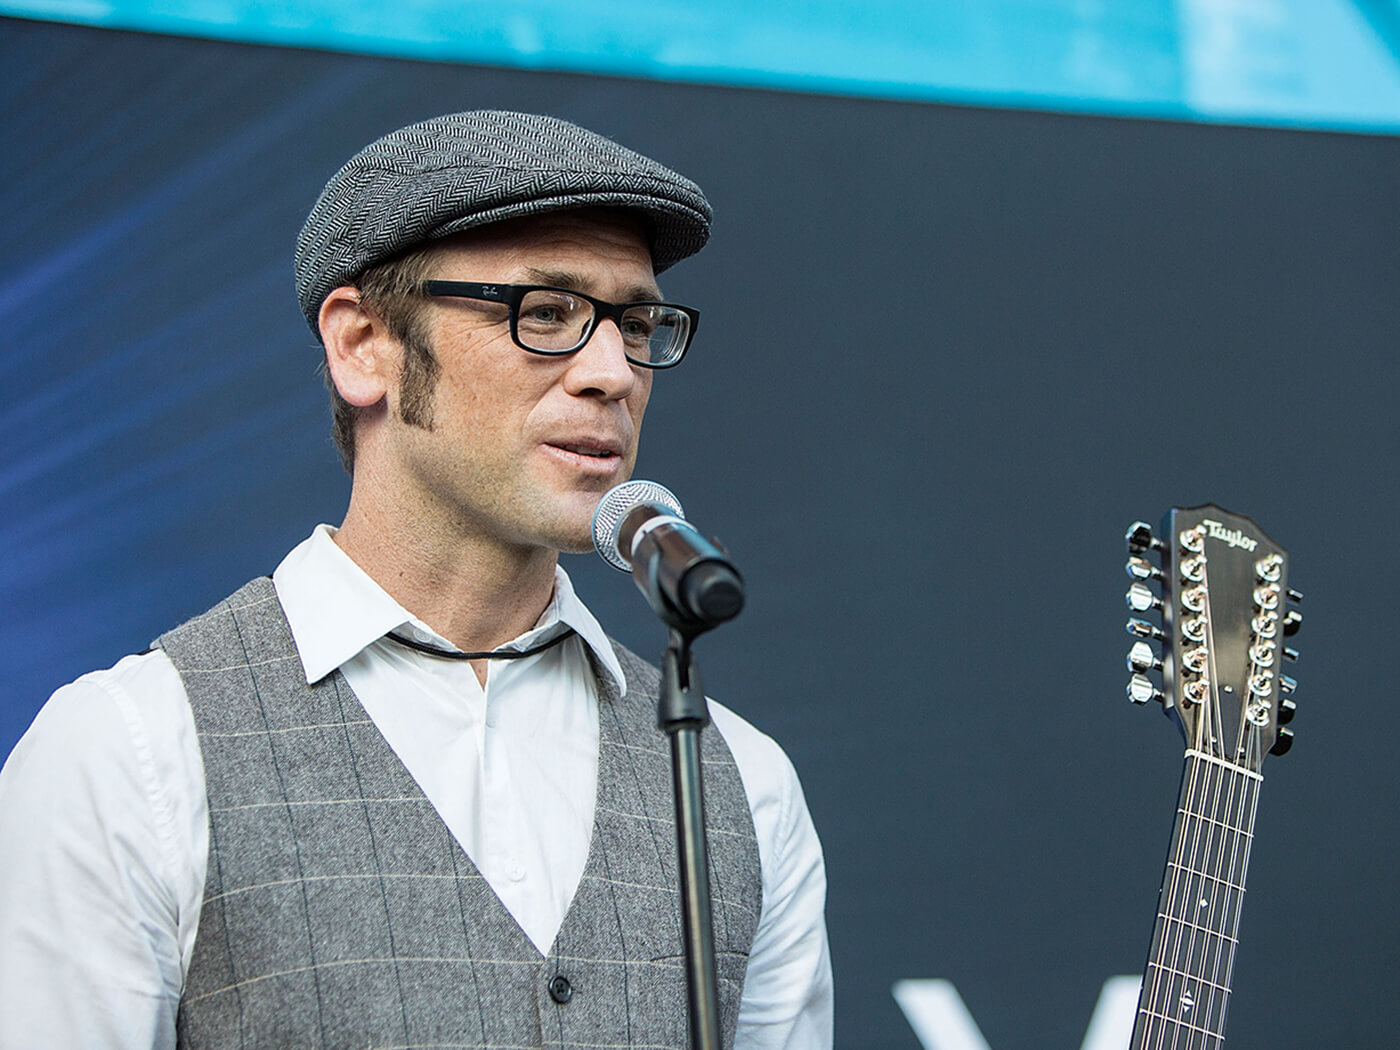 Andy Powers at the NAMM show preview day in 2016 by Daniel Knighton/FilmMagic via Getty Images